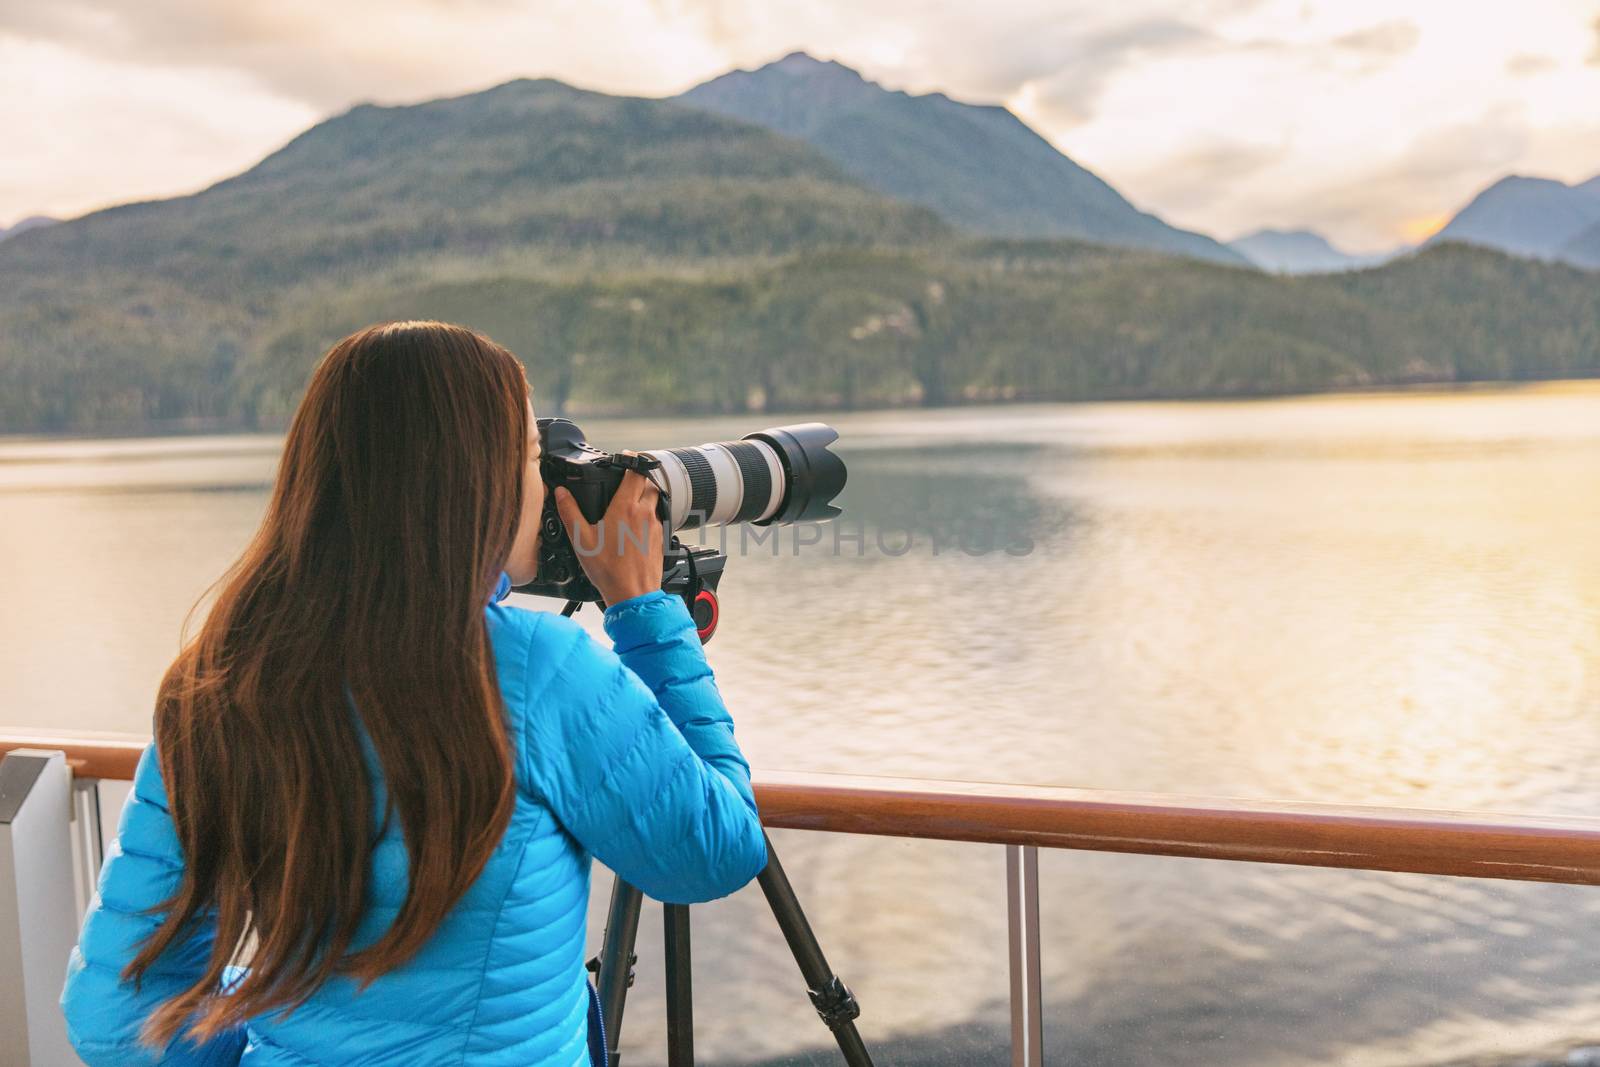 Travel photographer with professional telephoto lens camera on tripod shooting wildlife in Alaska, USA. Scenic cruising inside passage cruise tourist vacation adventure. Woman taking photo picture by Maridav